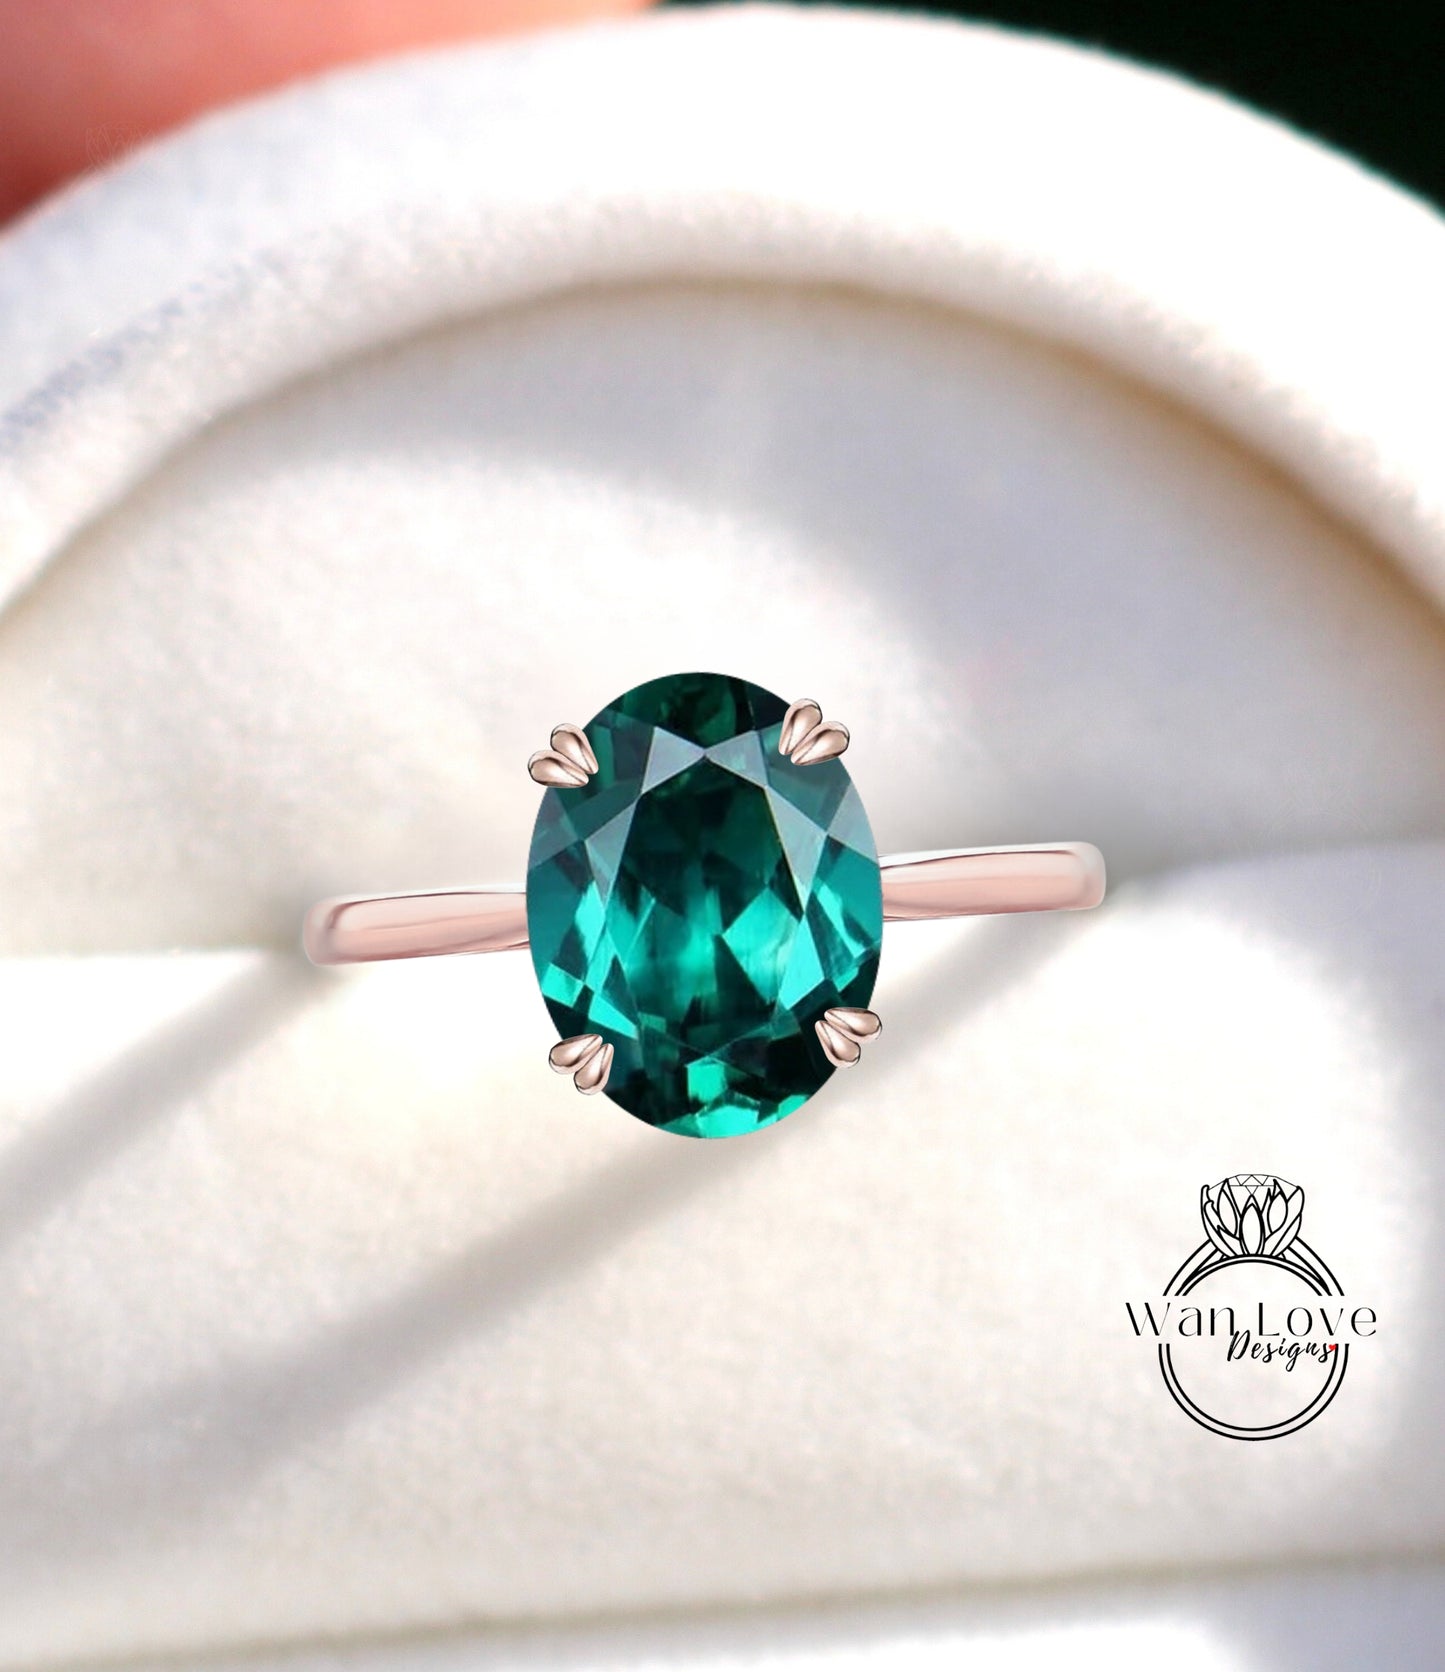 Emerald Solitaire Oval Engagement Ring, 14k 18k White Yellow Rose Gold,Platinum,Custom made,Wedding,Anniversary,Cathedral, WanLoveDesigns